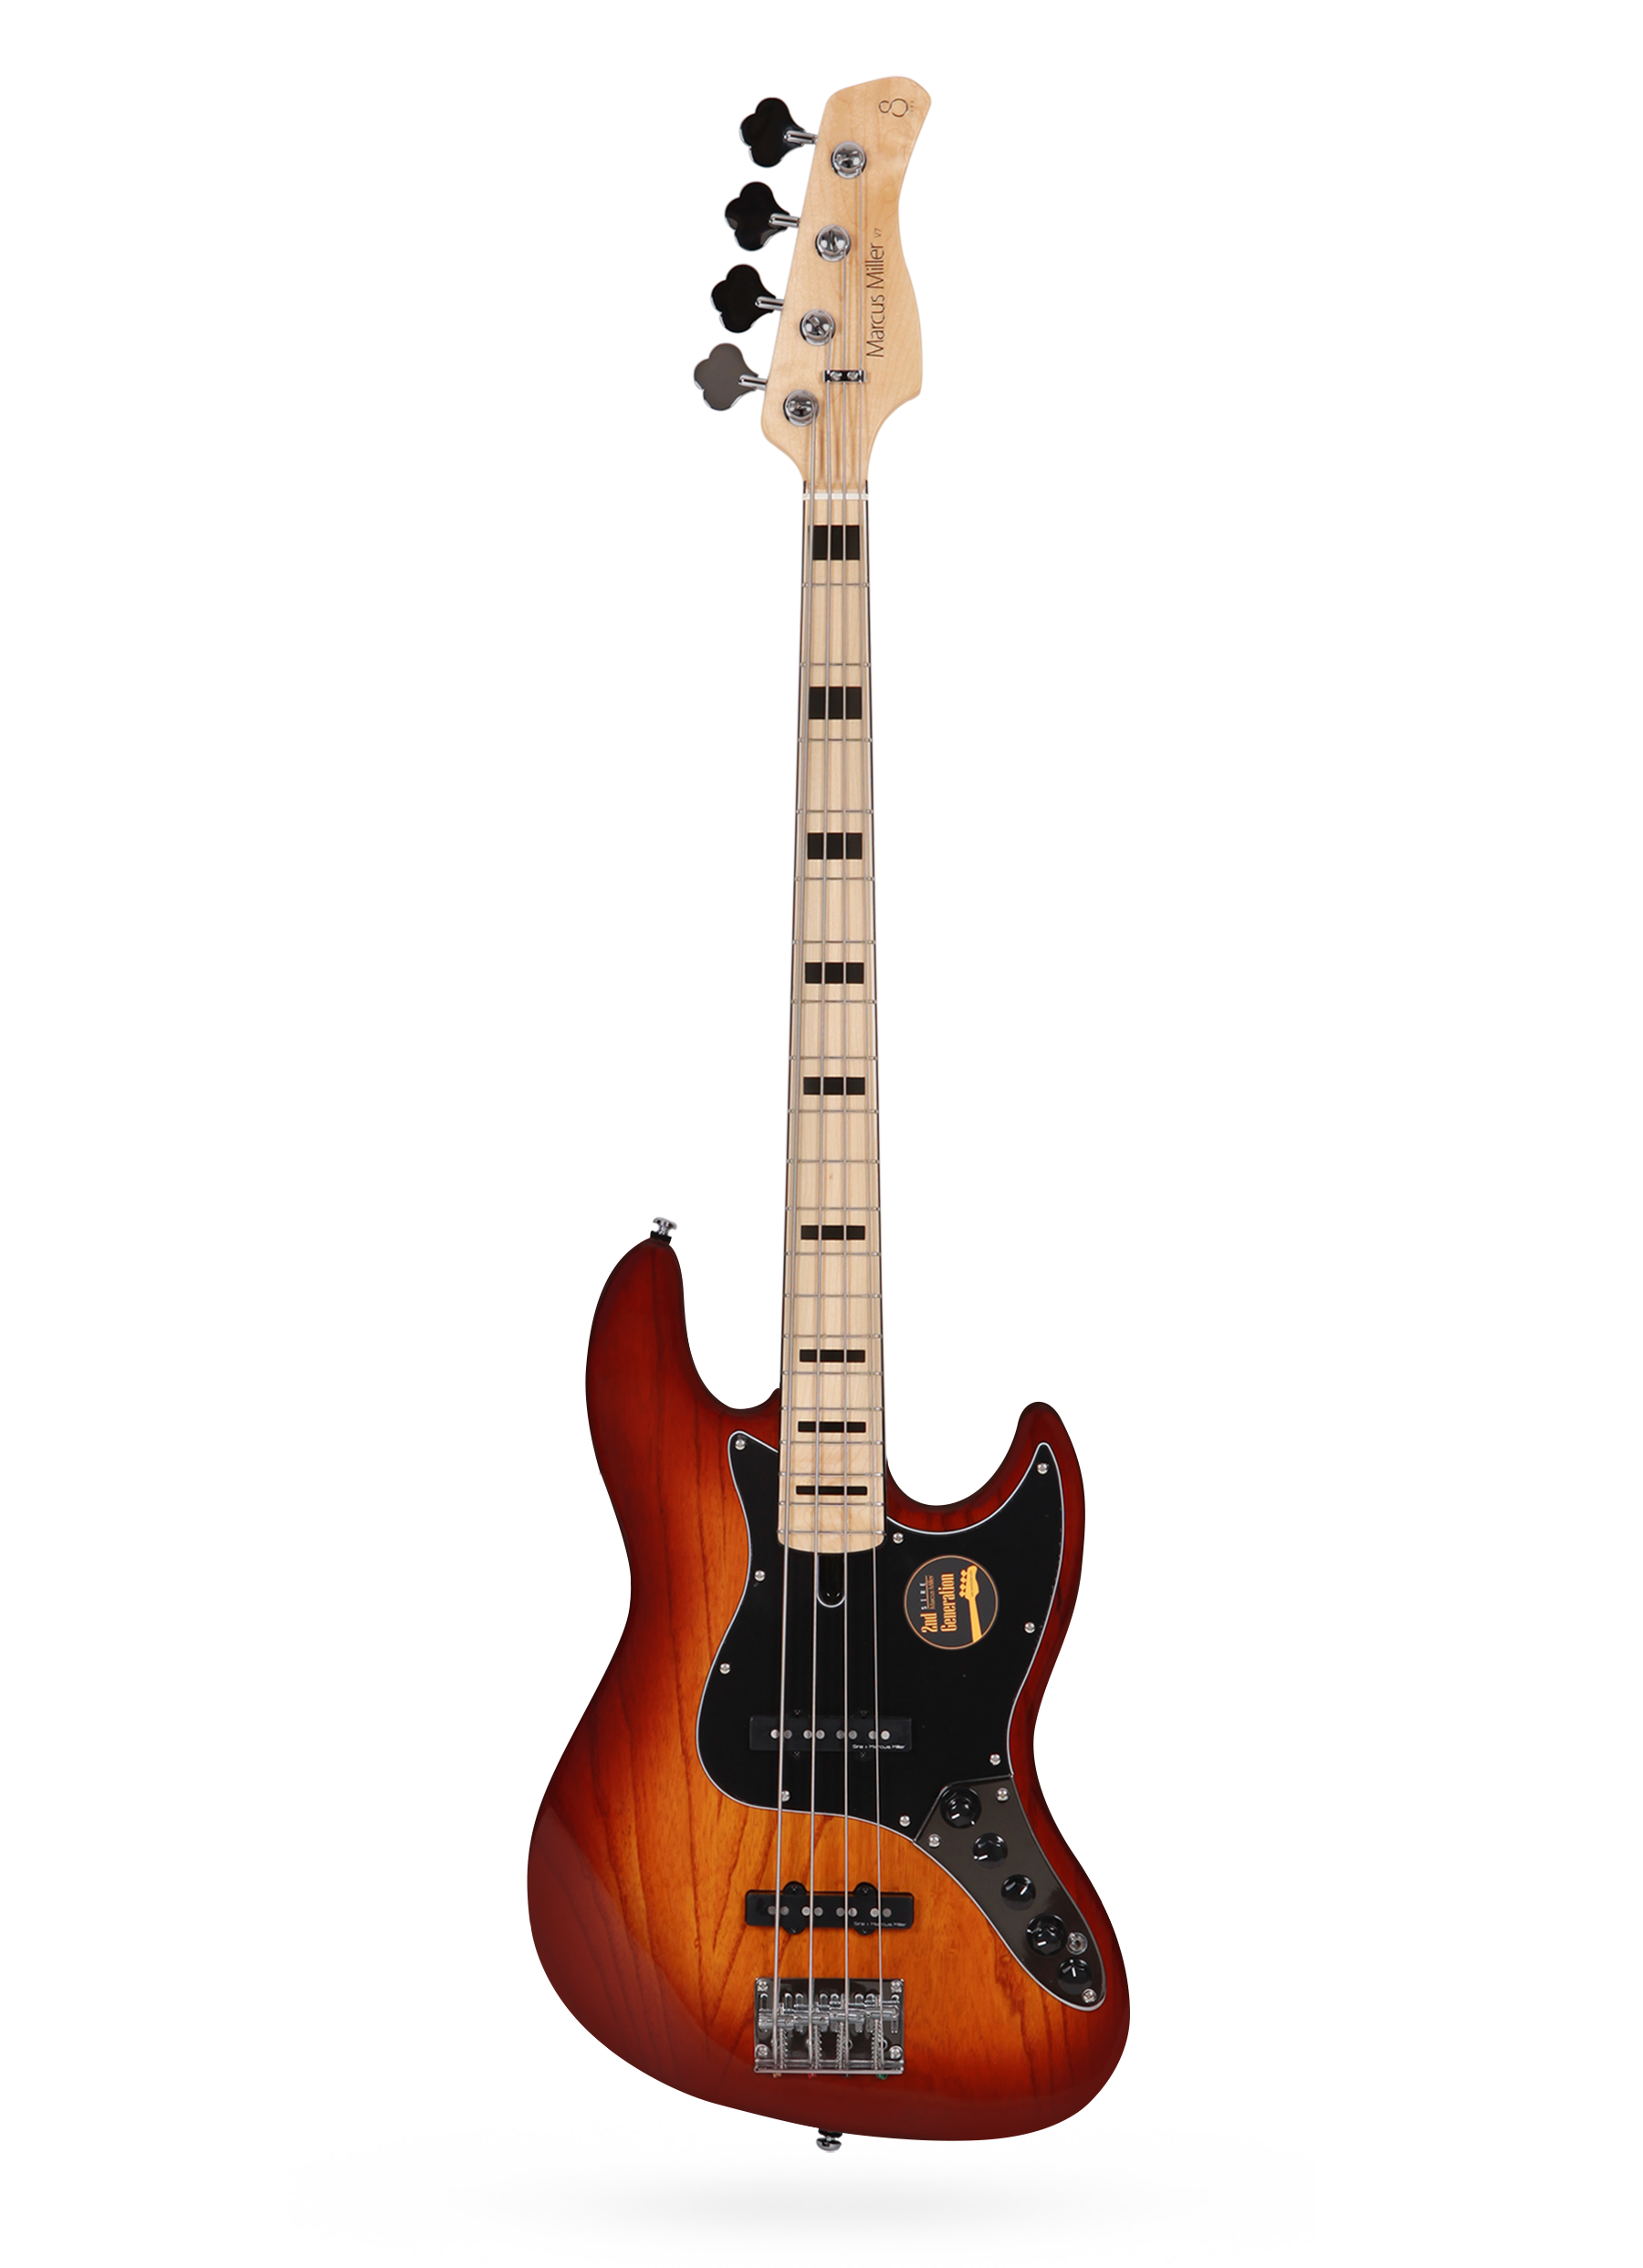 Sire Marcus Miller V7 Vintage 2nd Generation | Ash - Sire USA